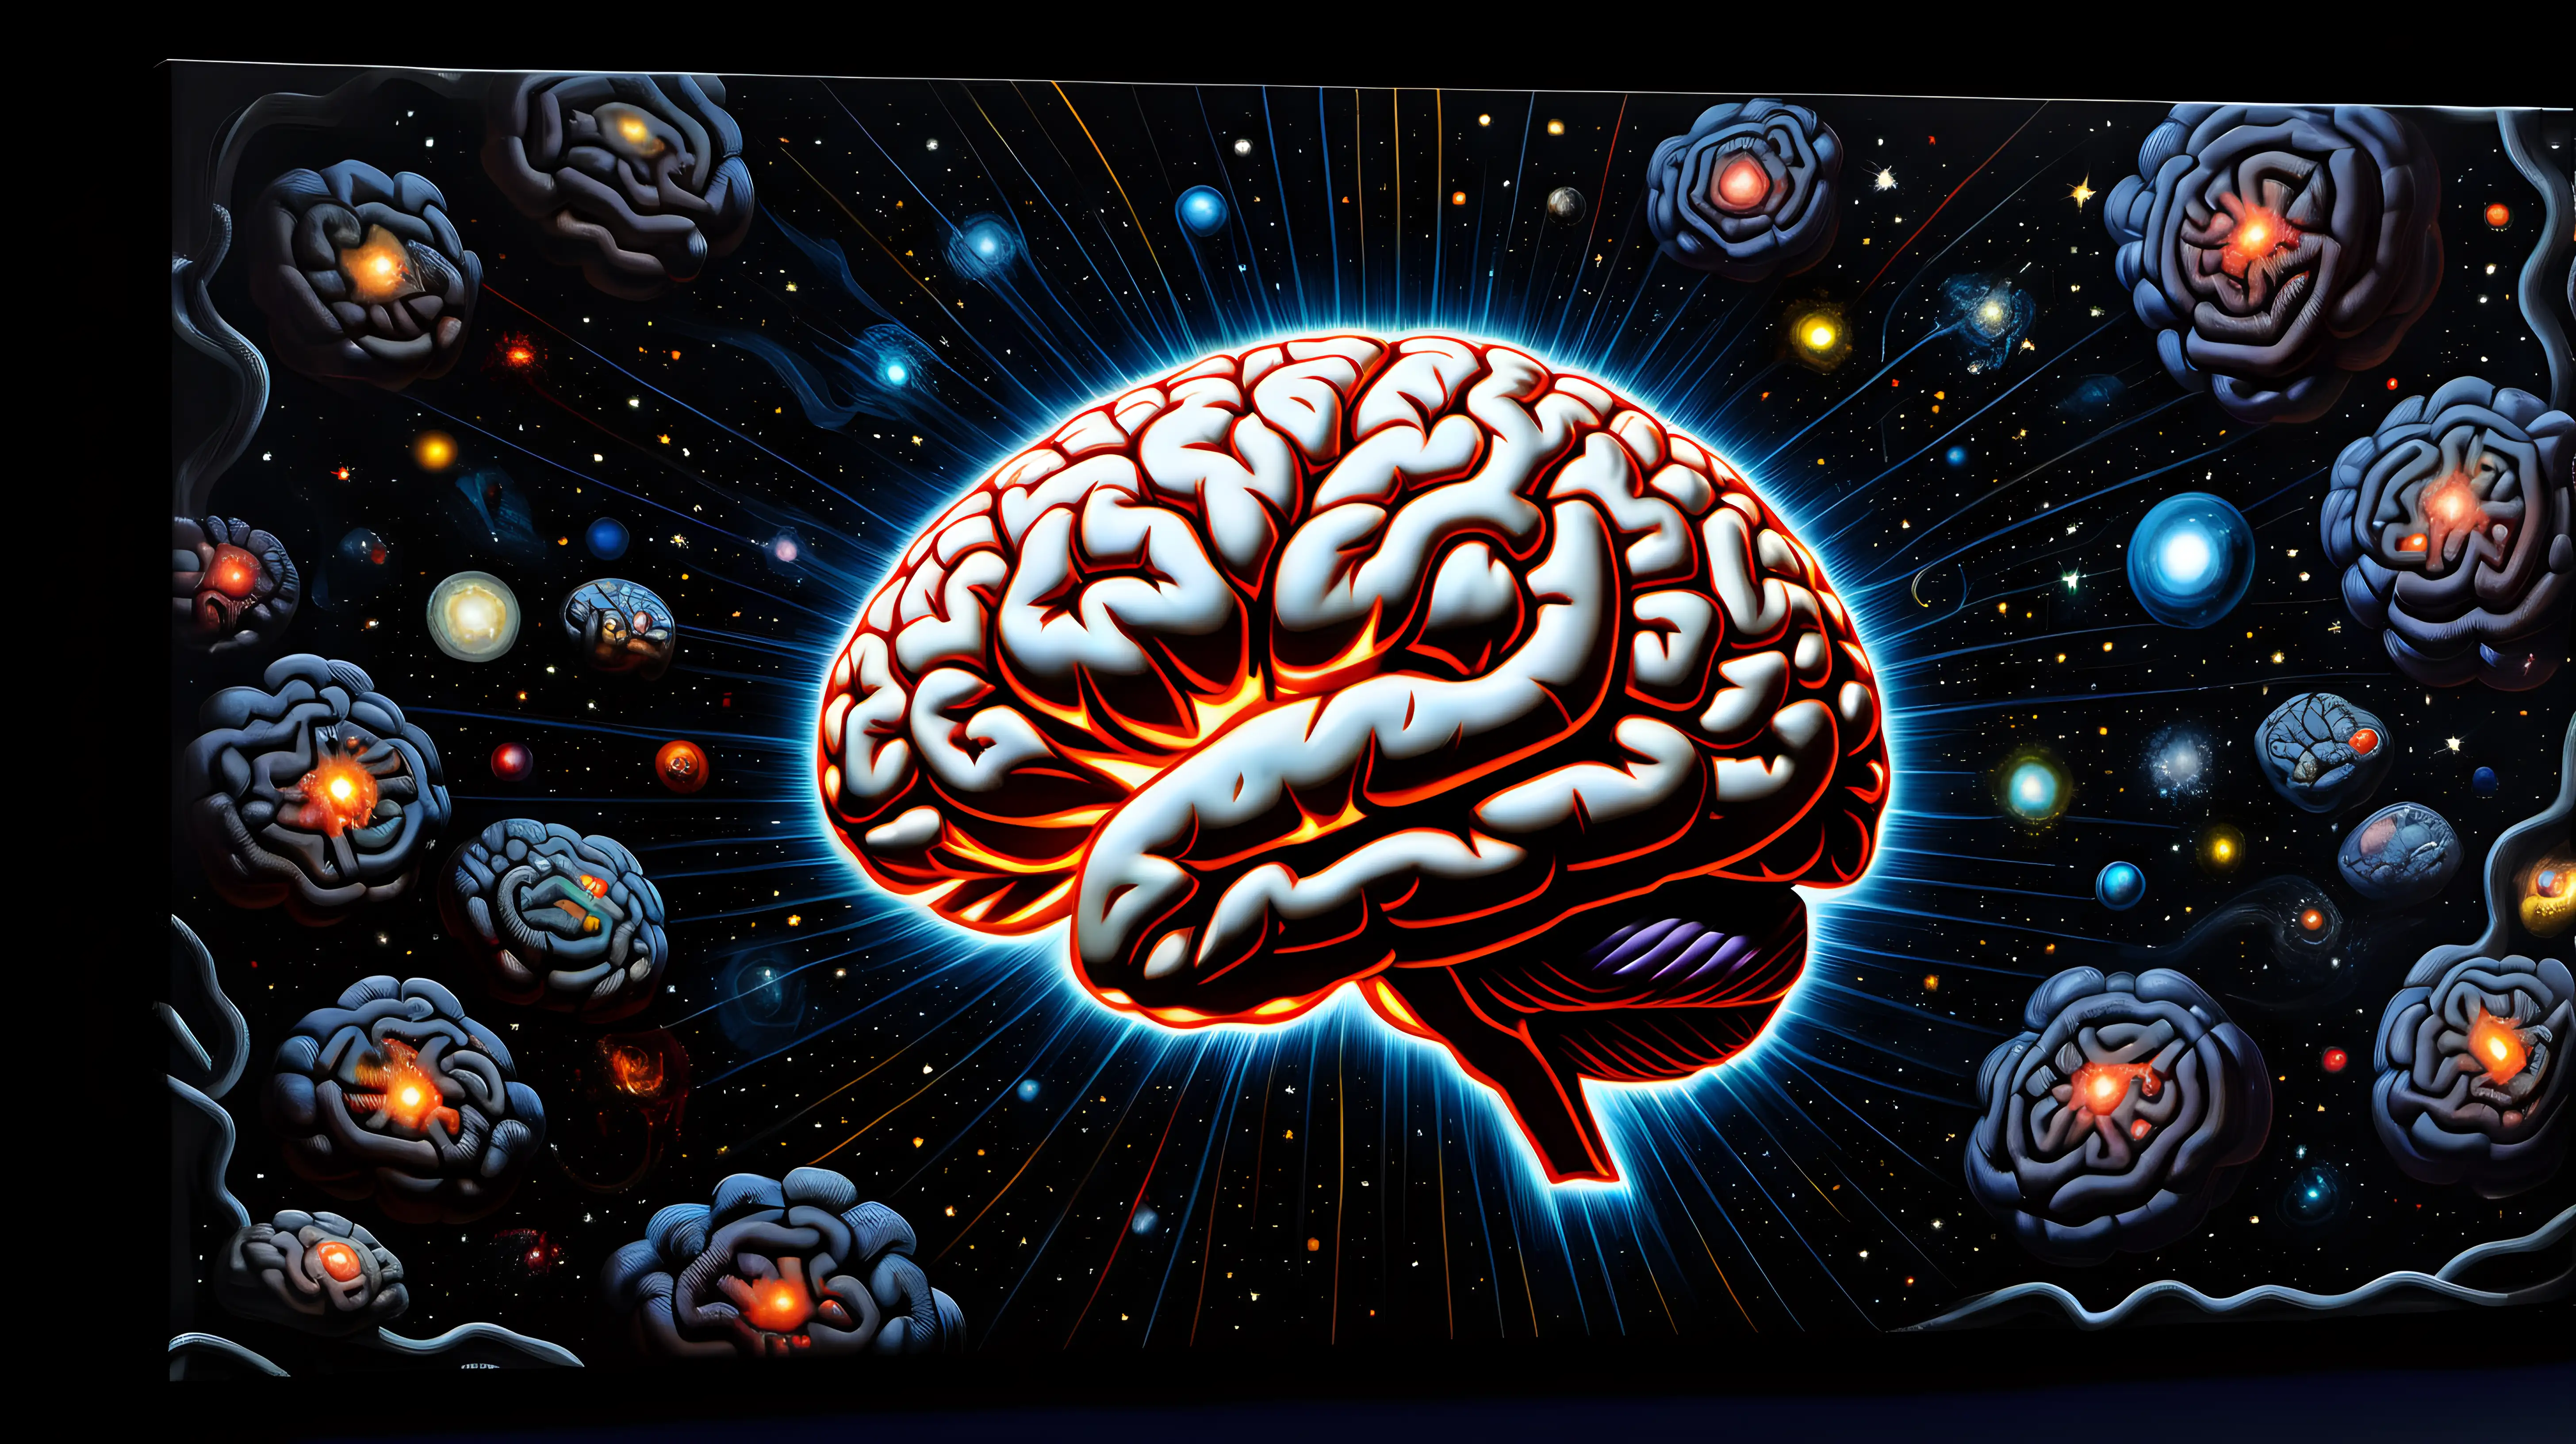 A canvas featuring a human brain, with luminous lights illuminating its intricate structures against the inky blackness of space.